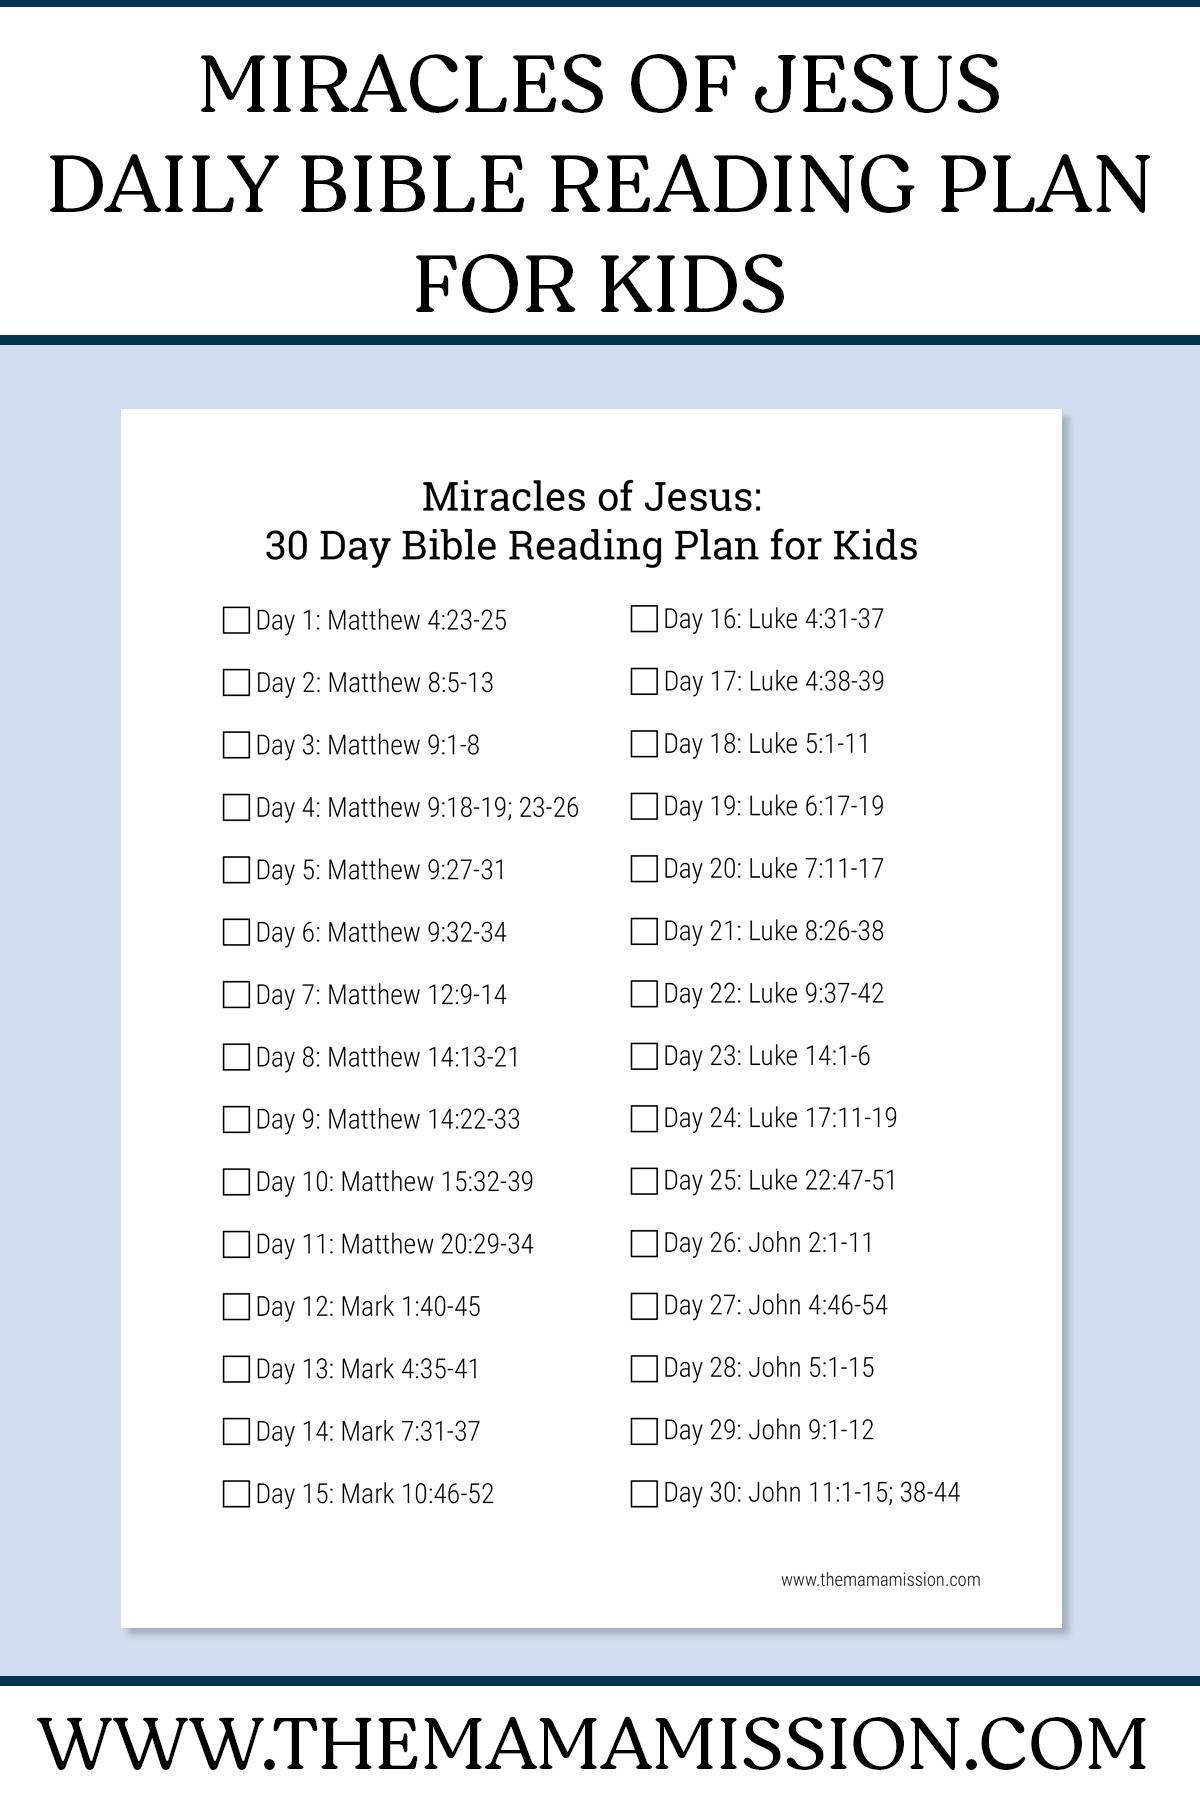 miracles-of-jesus-daily-bible-reading-plan-for-kids-the-mama-mission